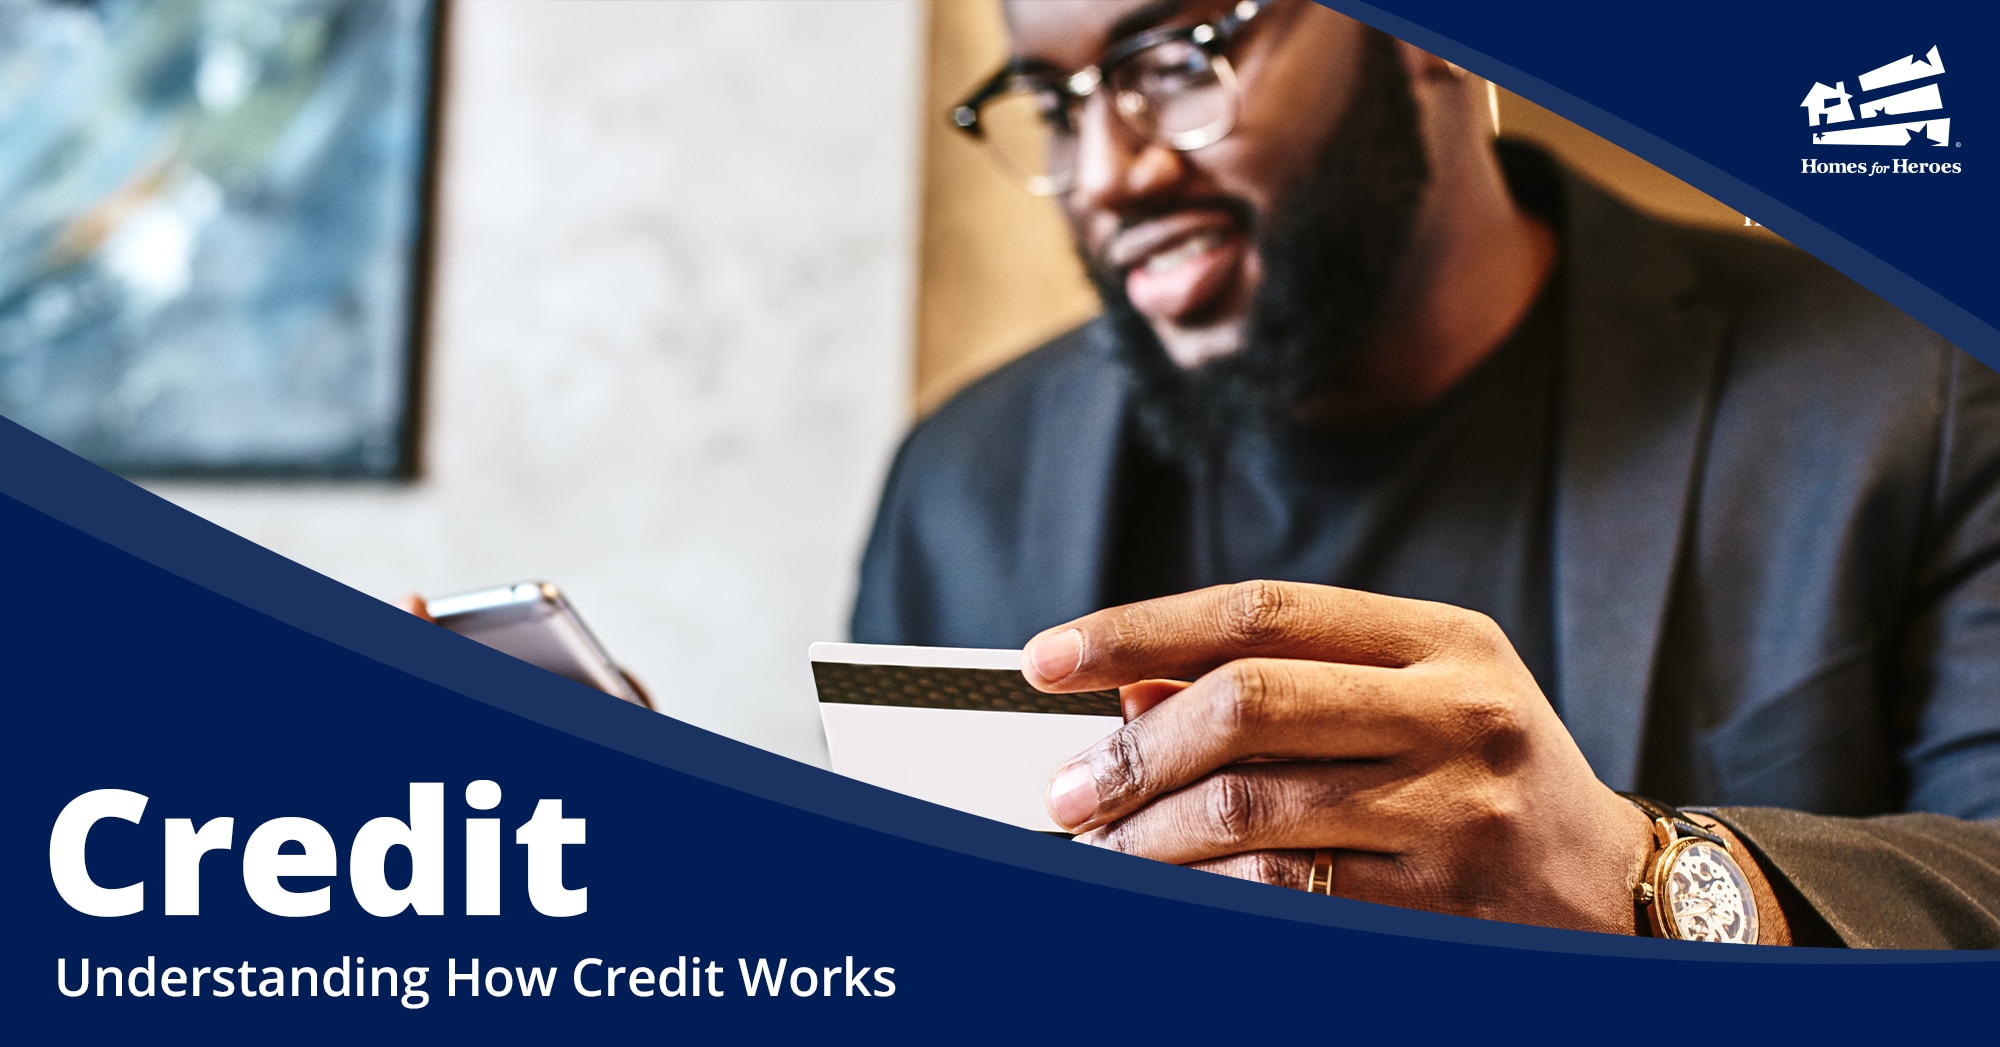 A man holding a credit card is looking at his credit score on a paper statement